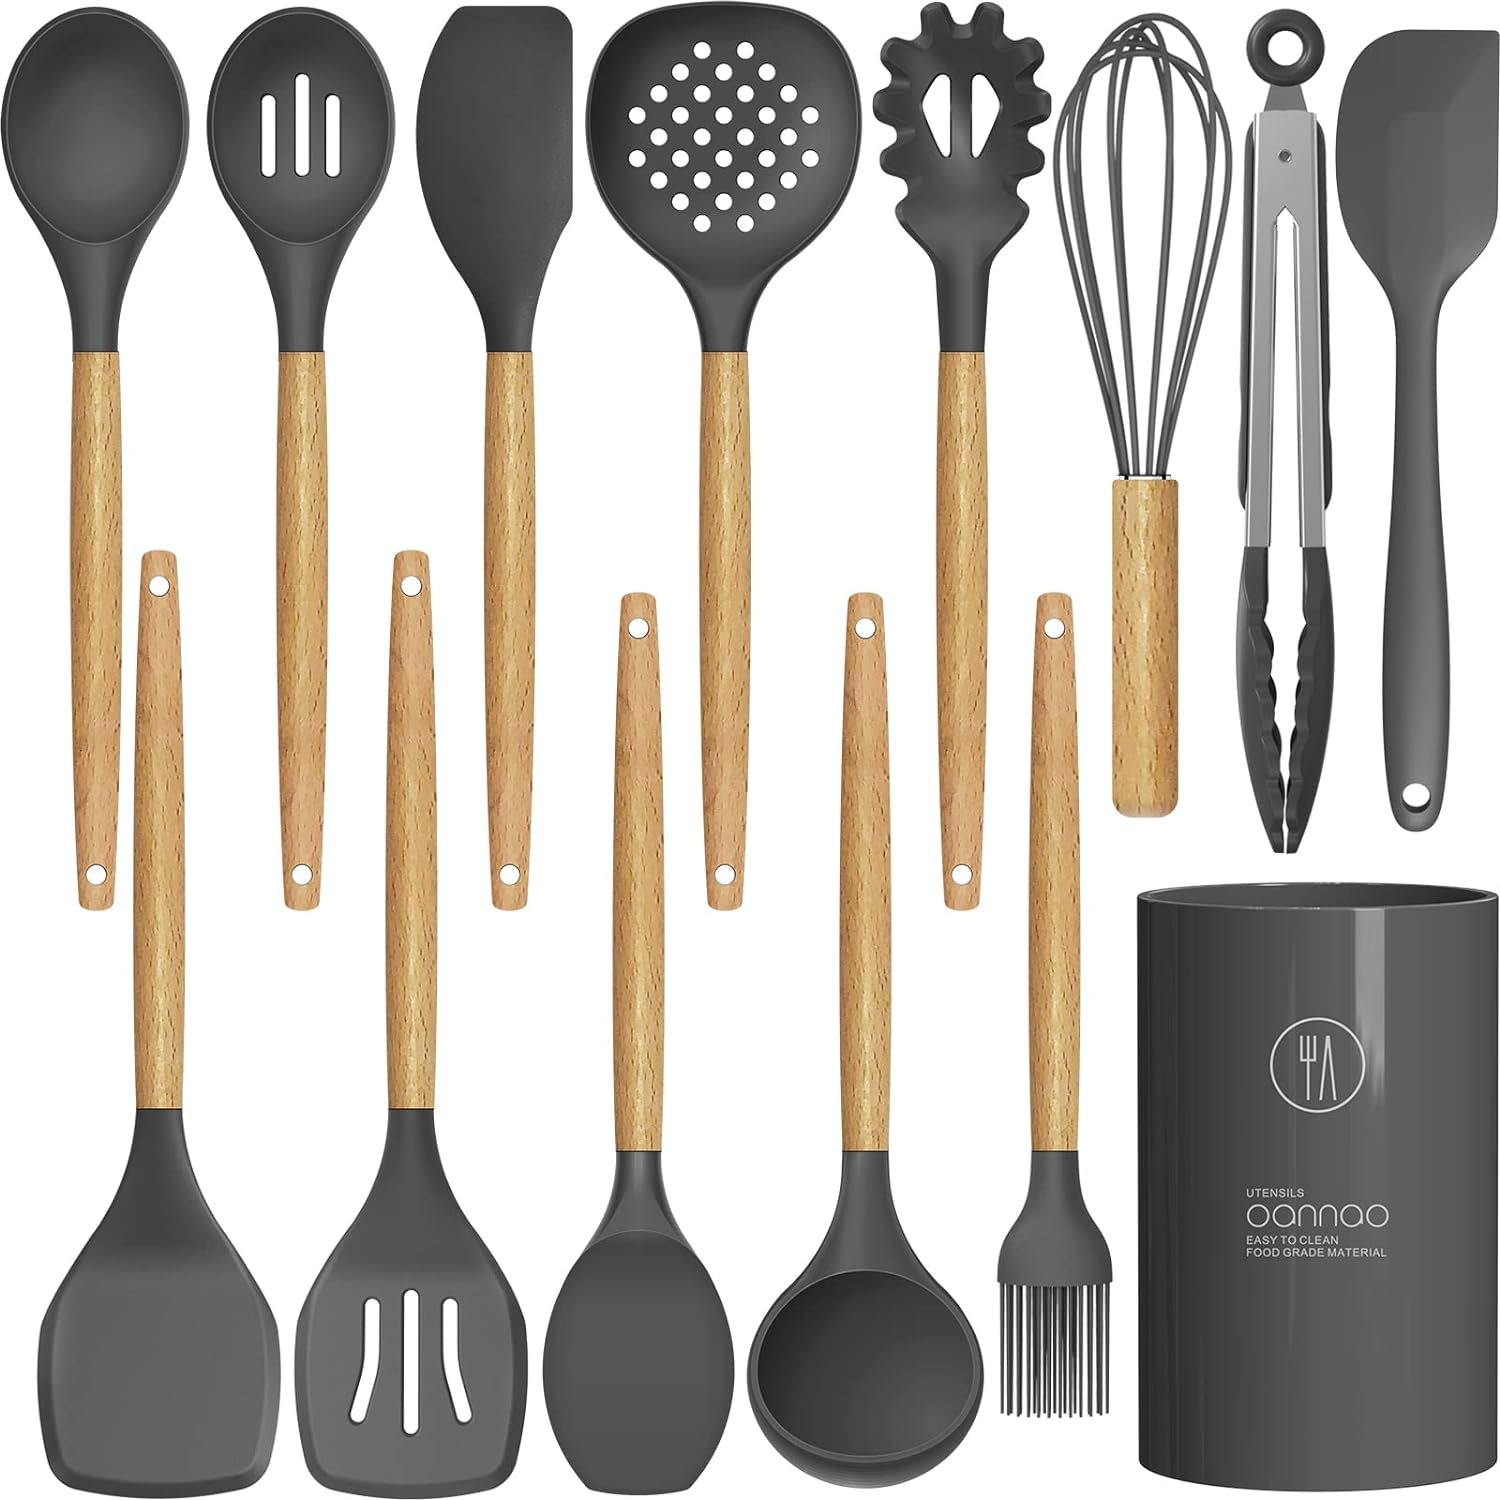 14 Pcs Silicone Cooking Utensils Kitchen Utensil Set - 446°F Heat Resistant,Turner Tongs, Spatula, Spoon, Brush, Whisk, Wooden Handle Gray Gadgets with Holder for Nonstick Cookware (BPA Free)